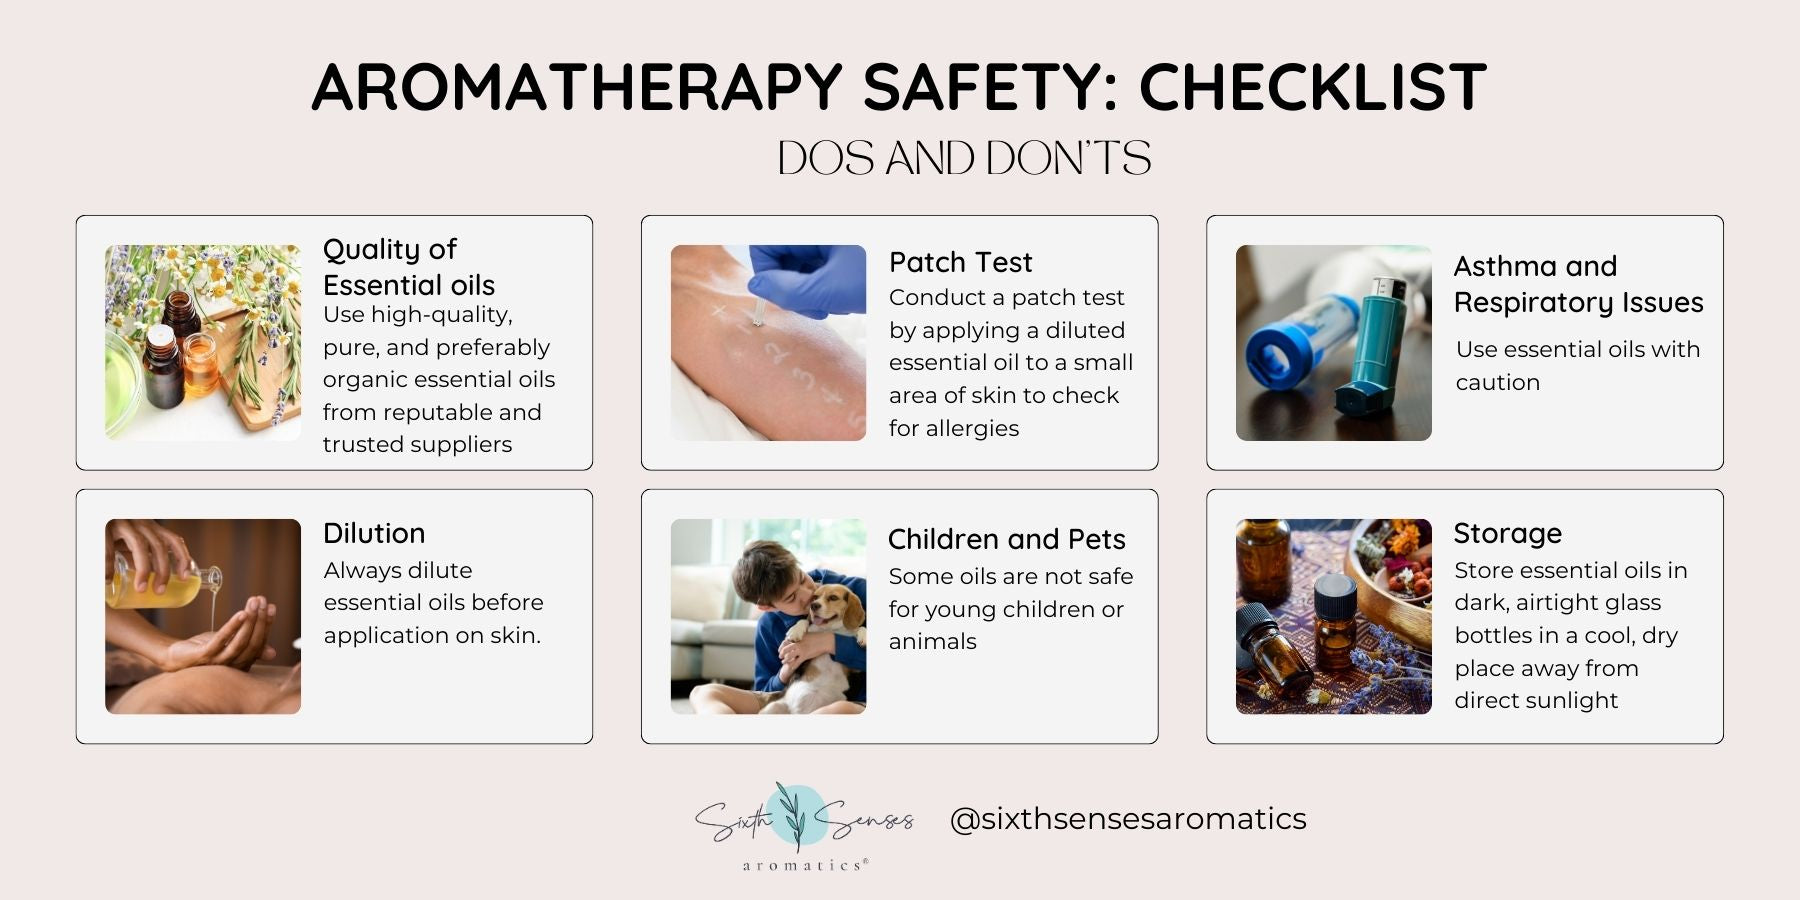 Aromatherapy Safety: Checklist for Dos and Don'ts